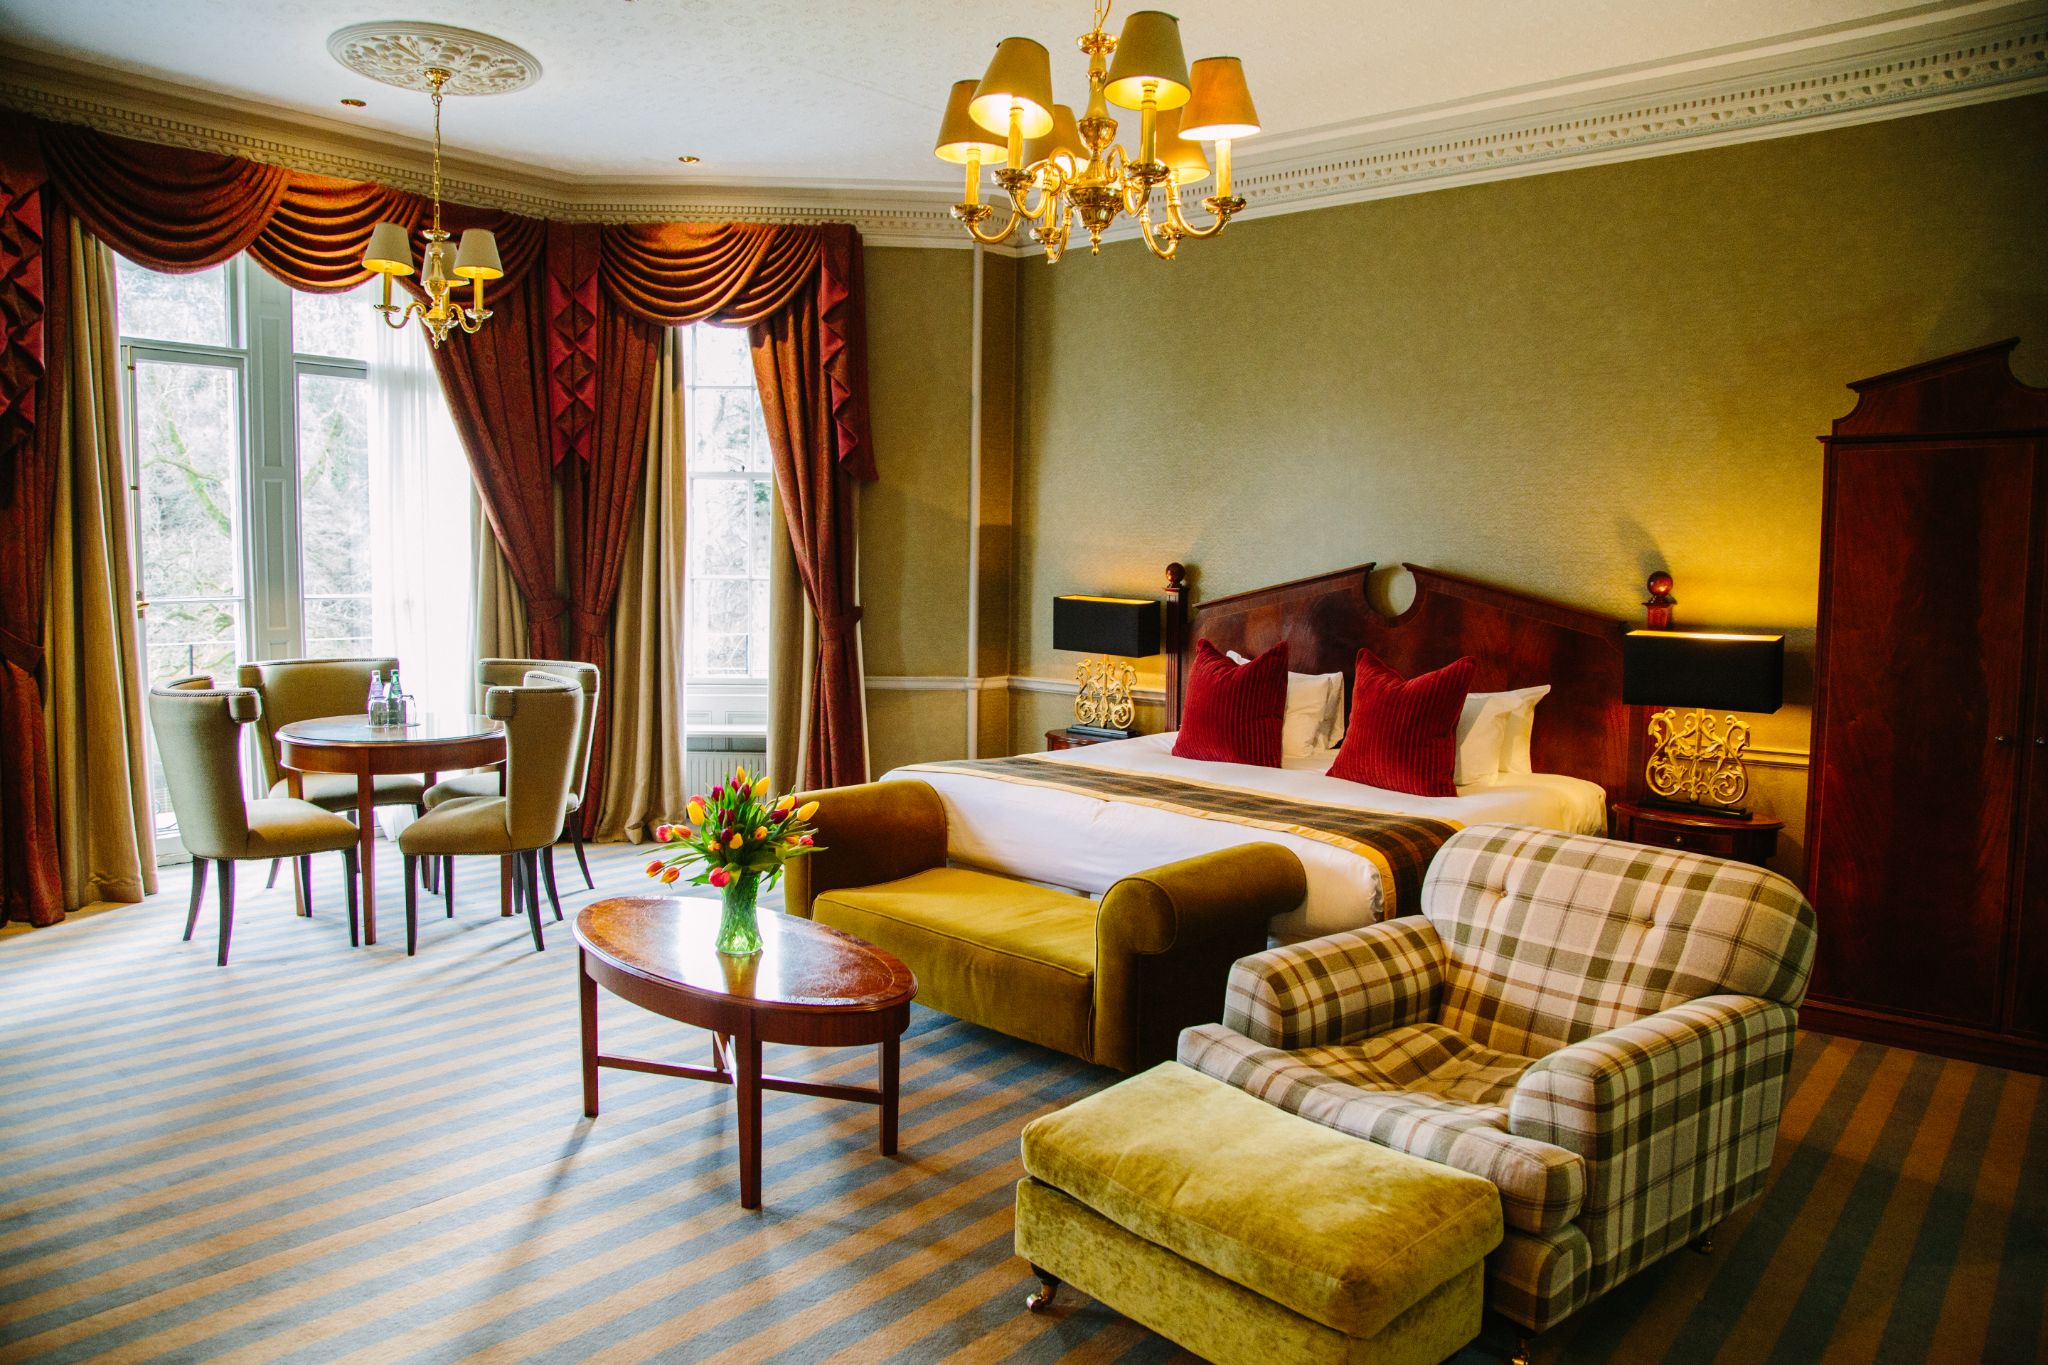 The Duchess Suite at Dunkeld House Hotel